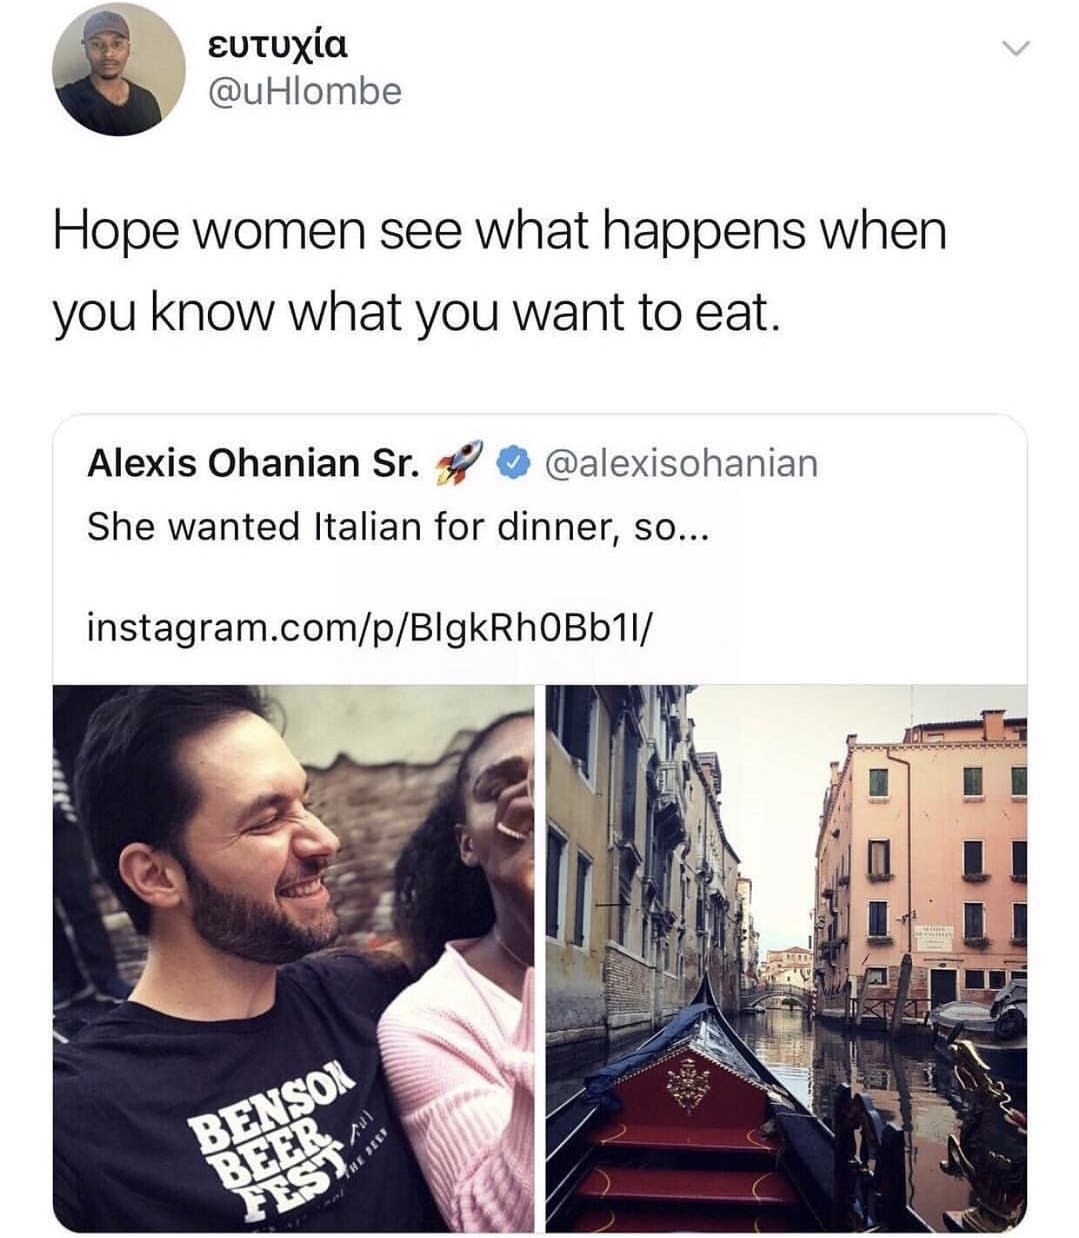 memes - Meme - Hope women see what happens when you know what you want to eat. Alexis Ohanian Sr. She wanted Italian for dinner, so... instagram.compBlgkRhOBb11 All Benson Beer Fescola